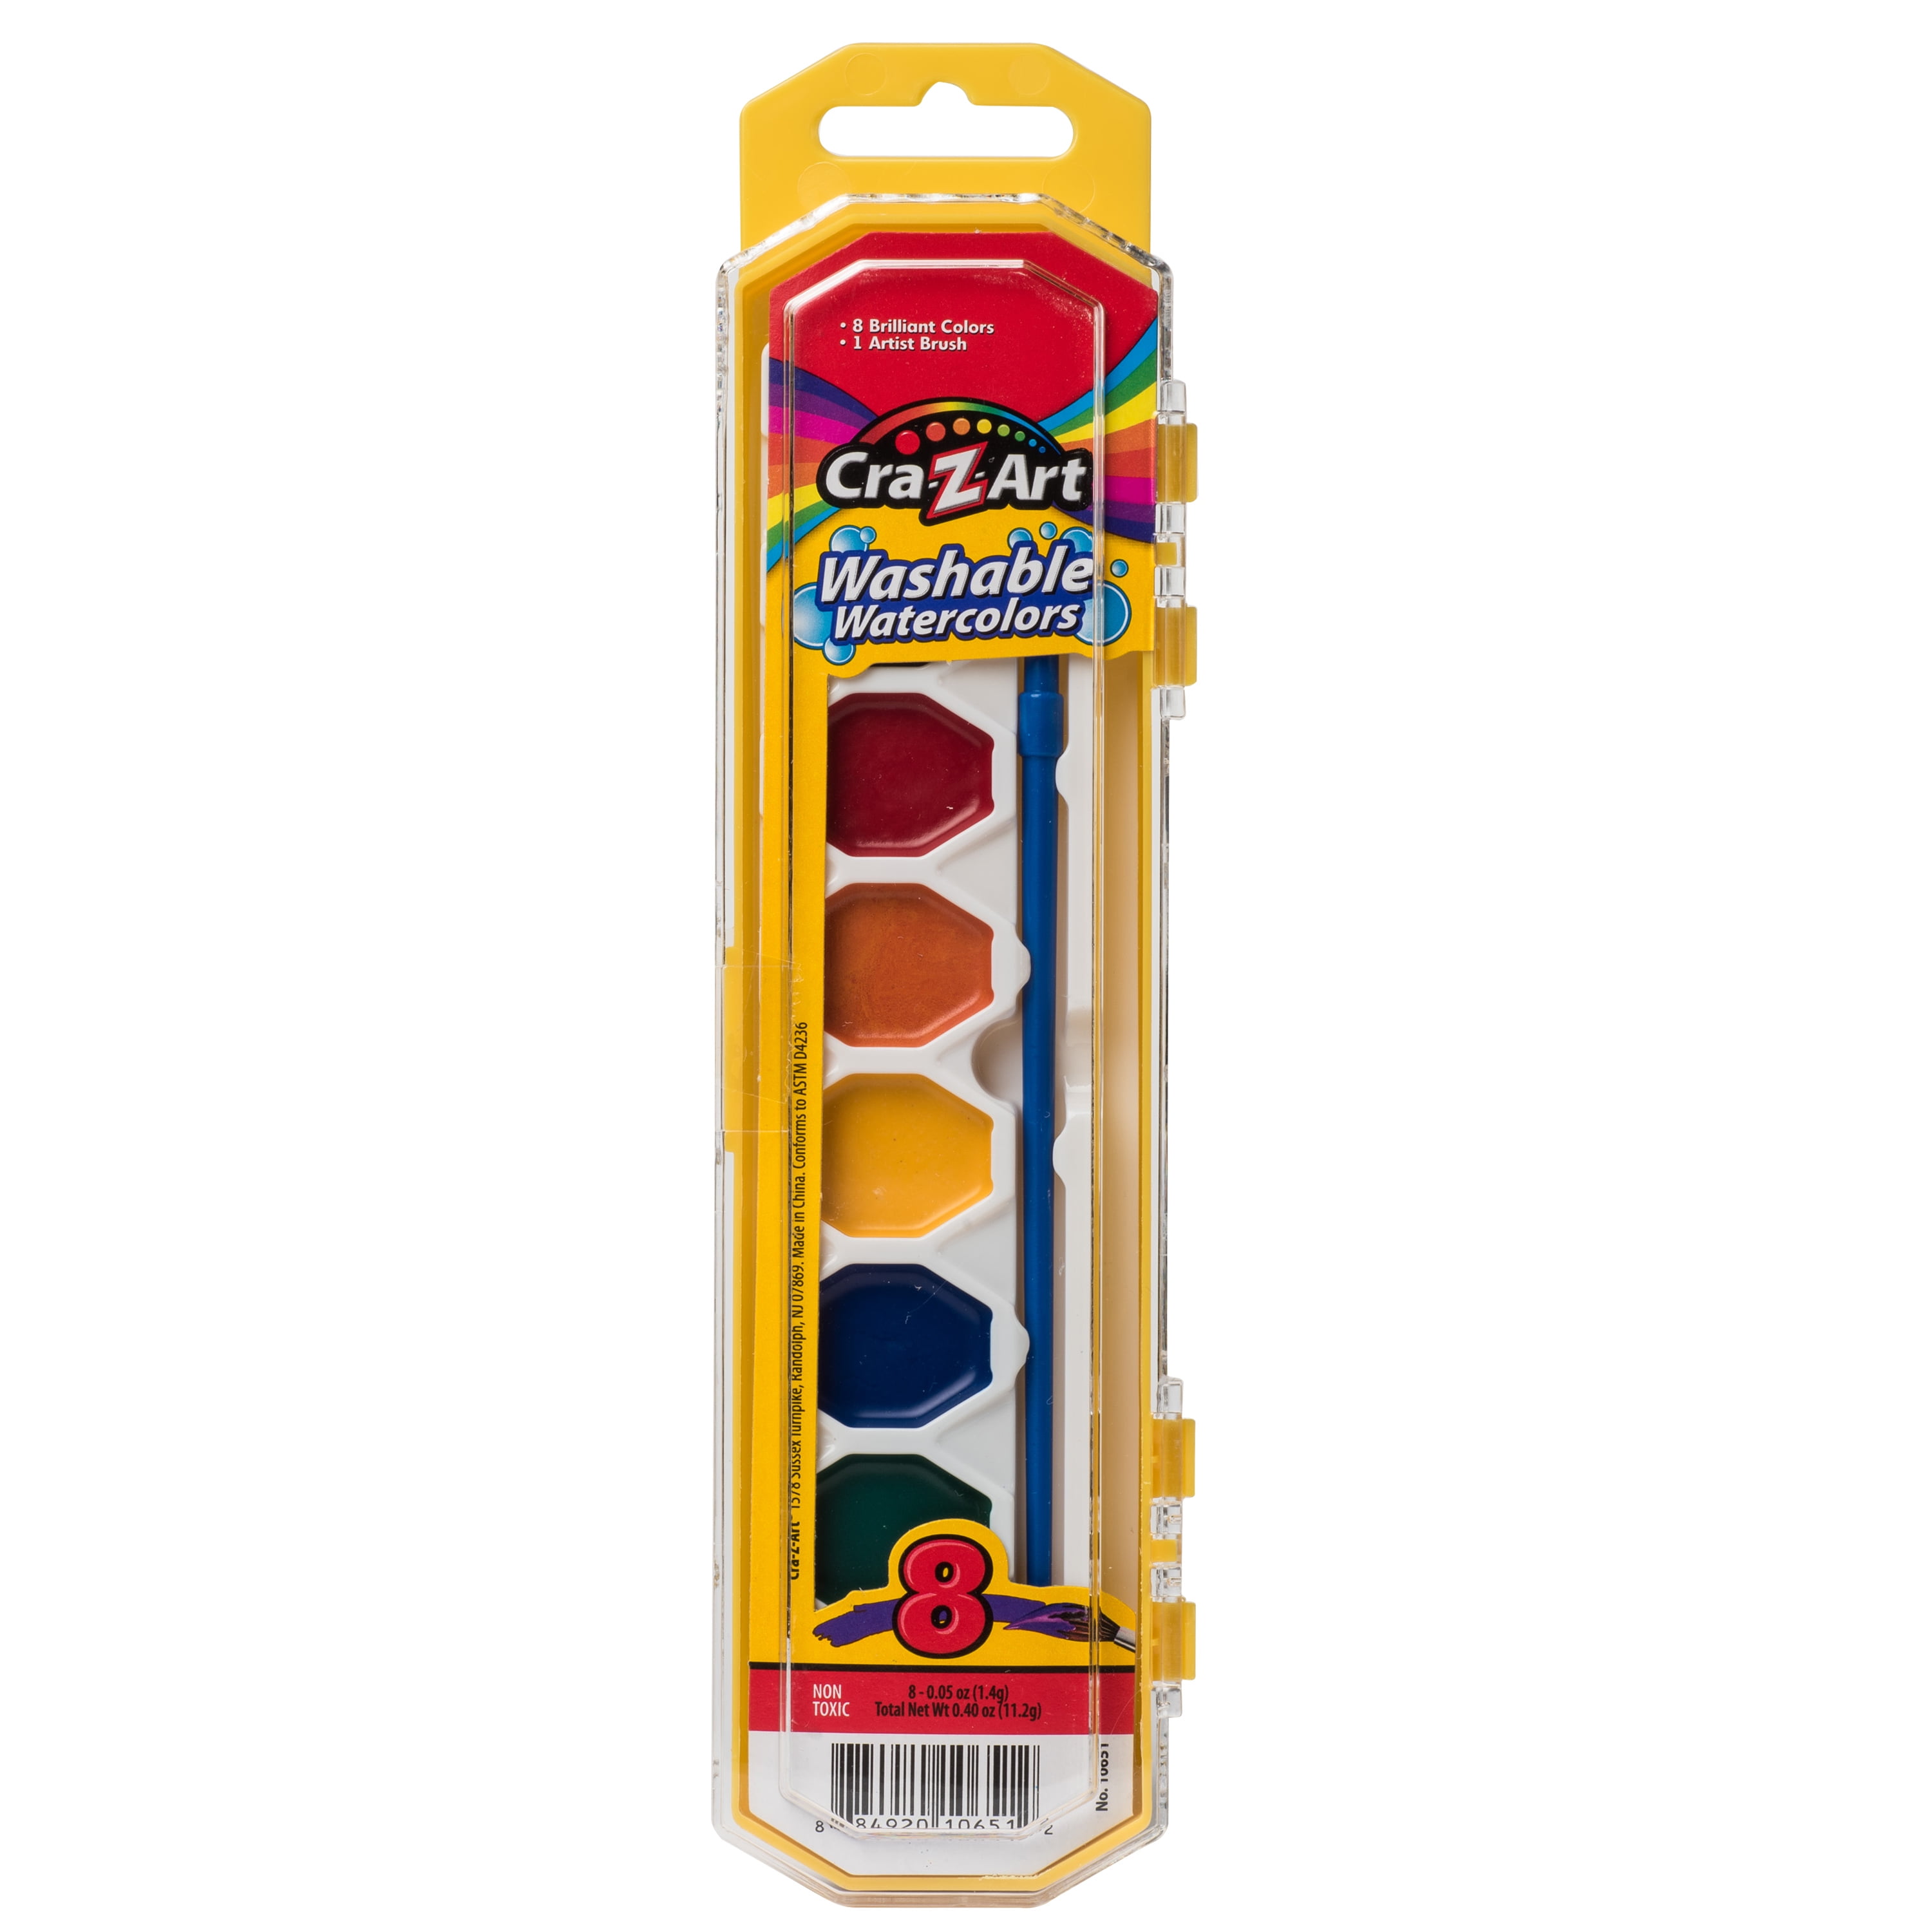 Cra-Z-Art Washable Watercolor Paints with Brush, Multicolor Set, Child to Adult